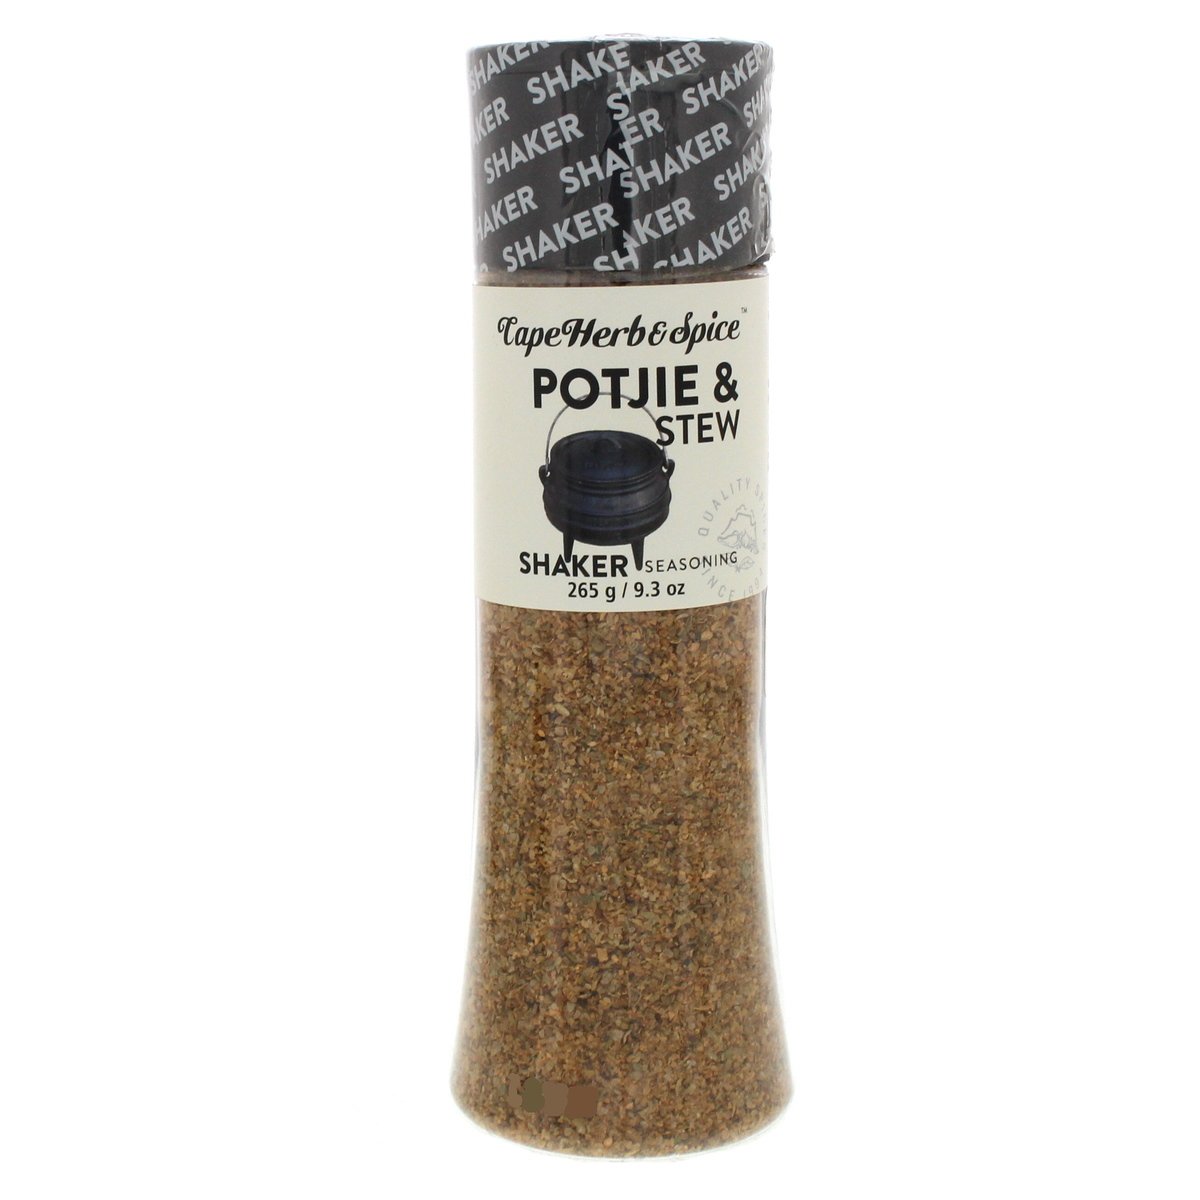 Cape Herb & Spice Potjie And Stew Shaker Seasoning 265 g